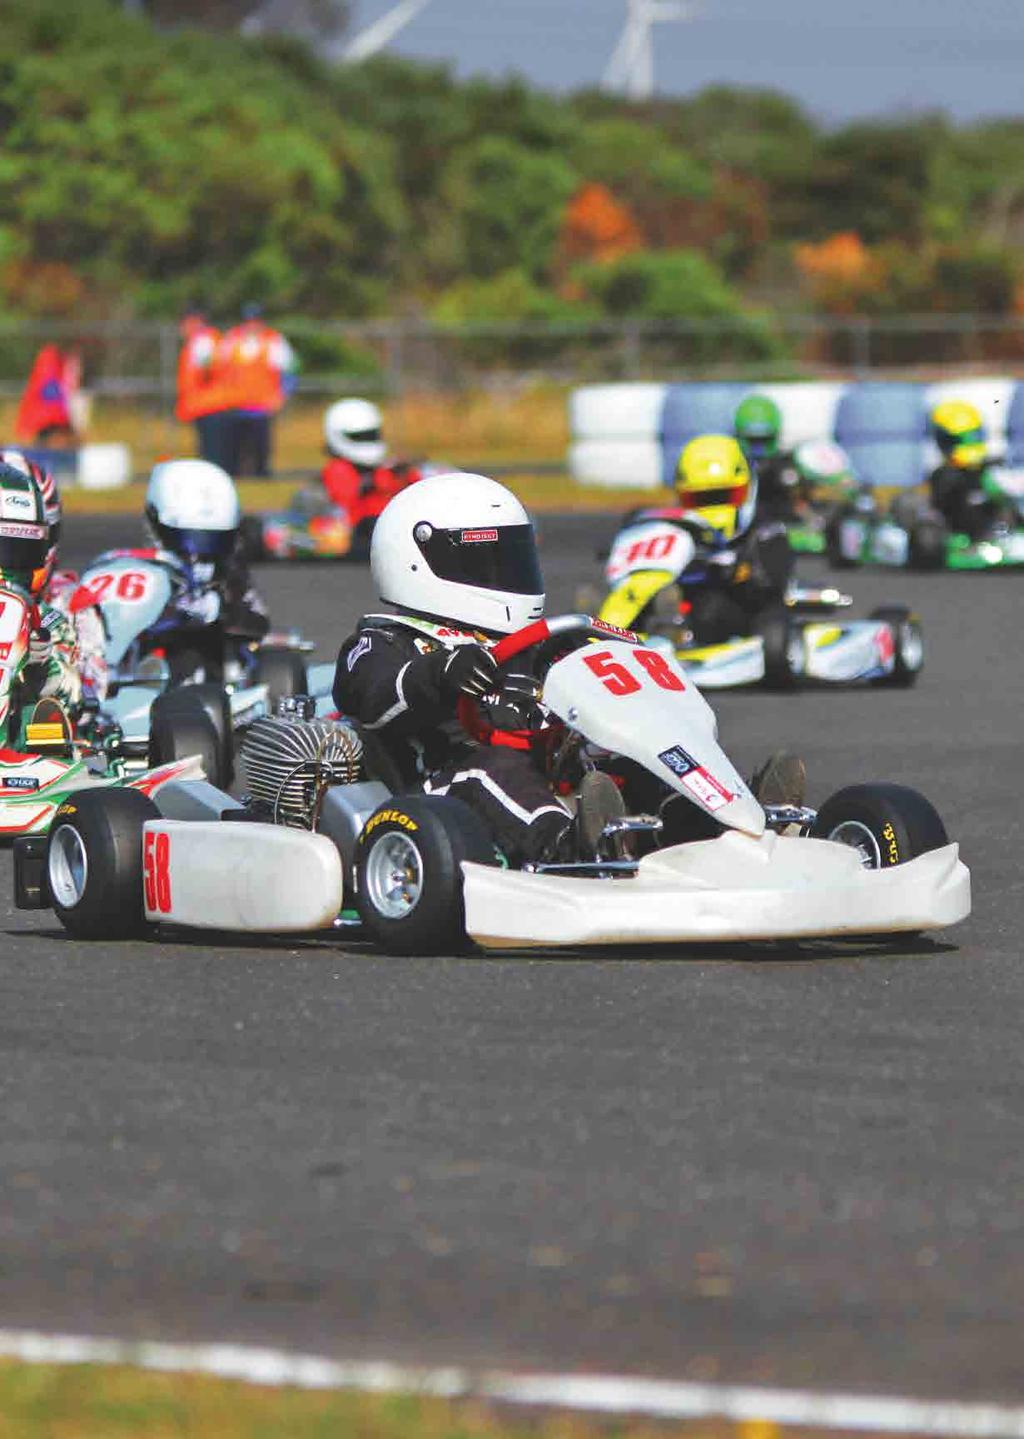 WHY SUPPORT US? Many of the Kart racers that compete in the Victorian Country Series may already support your business. They may live and work in your town or a town your business services.